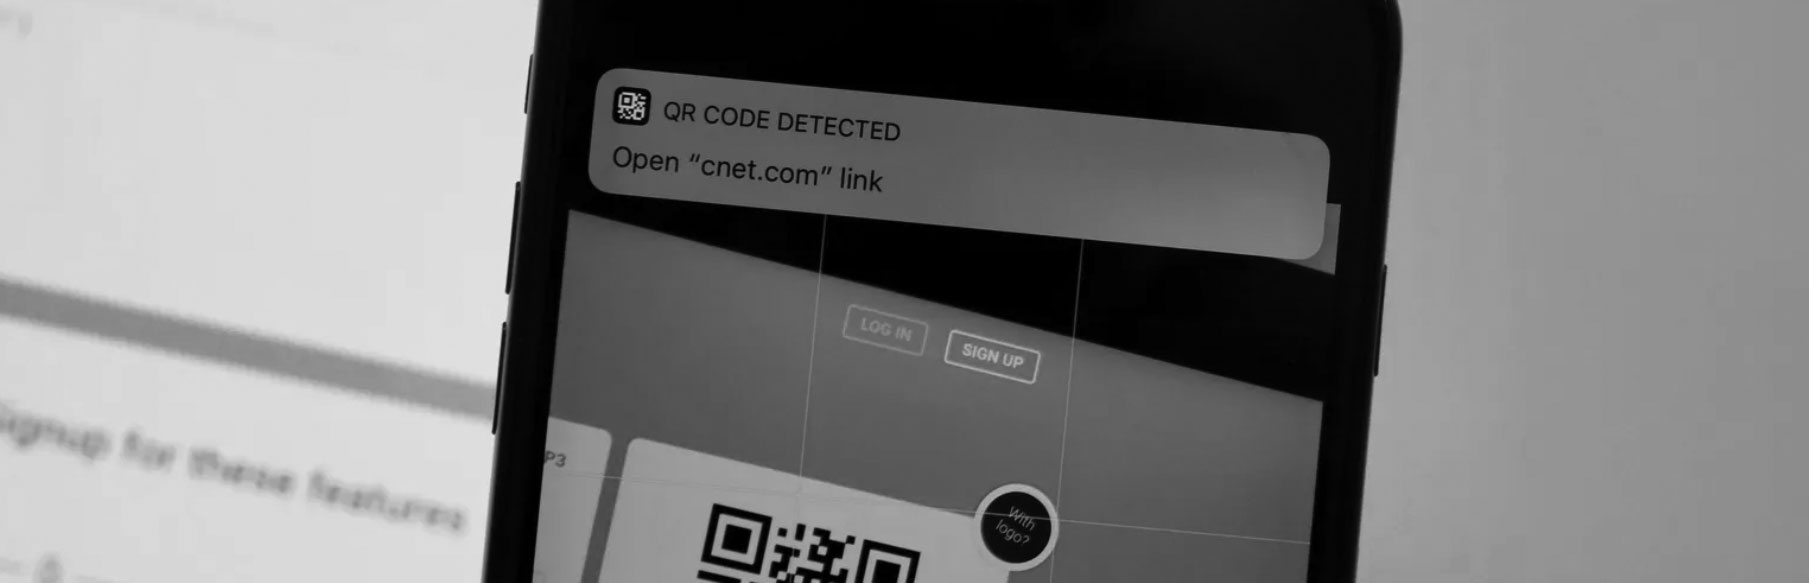 iOS 11 QR Code Reader in Camera and Direct Mail